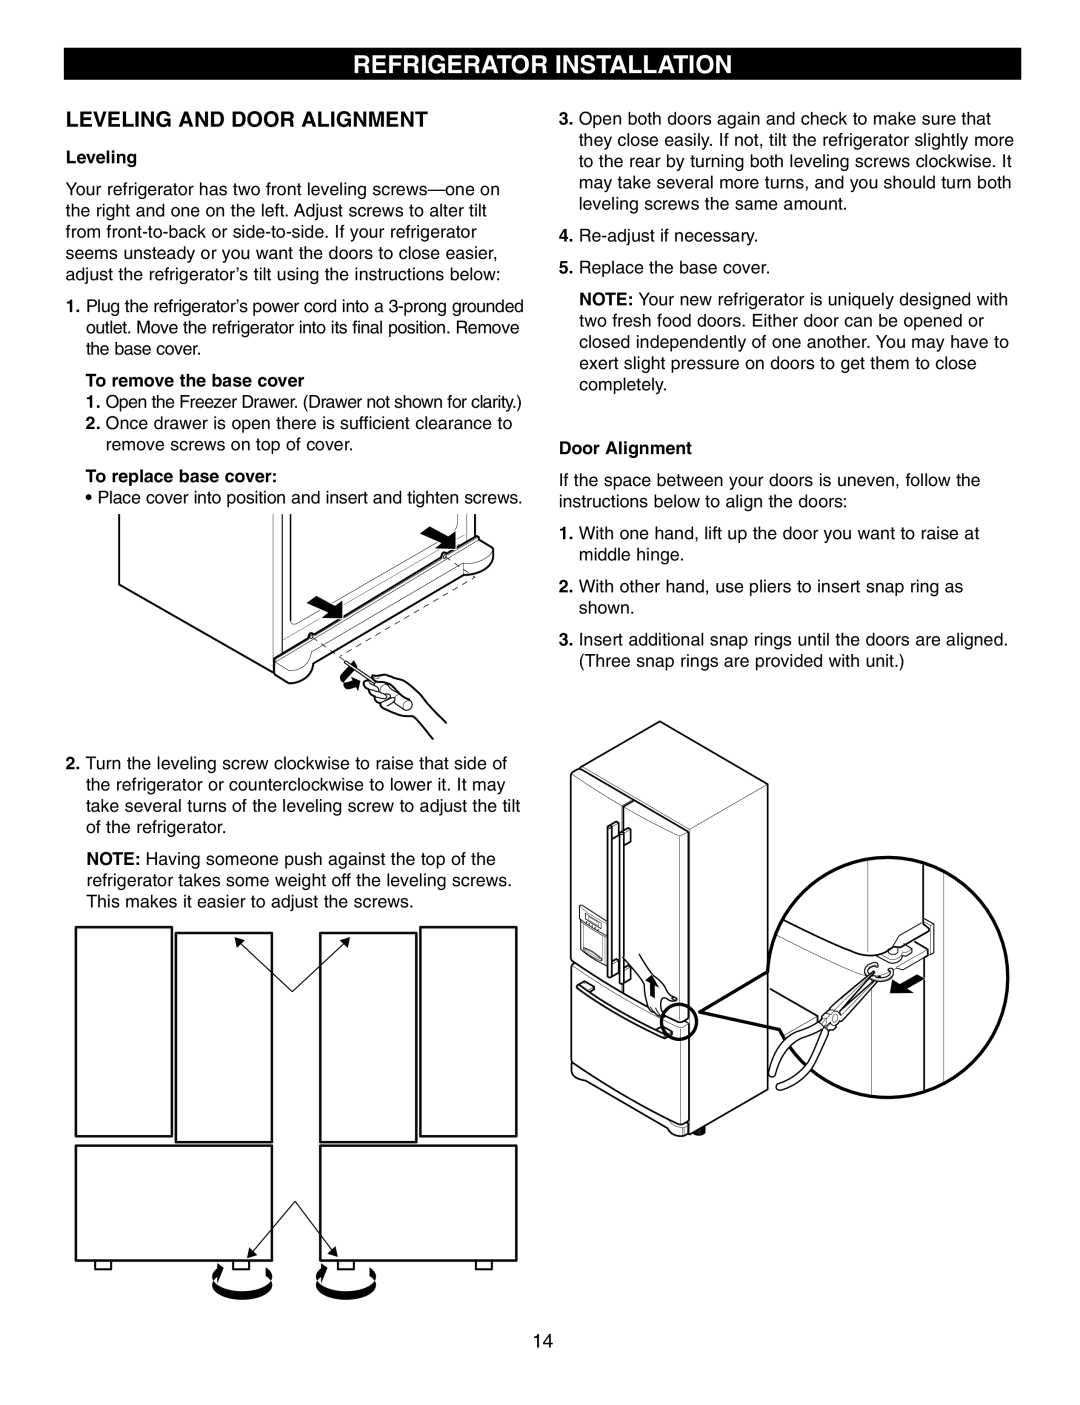 LG Electronics LRFD25850, LRFD21855 manual Refrigerator Installation, Leveling And Door Alignment, To remove the base cover 